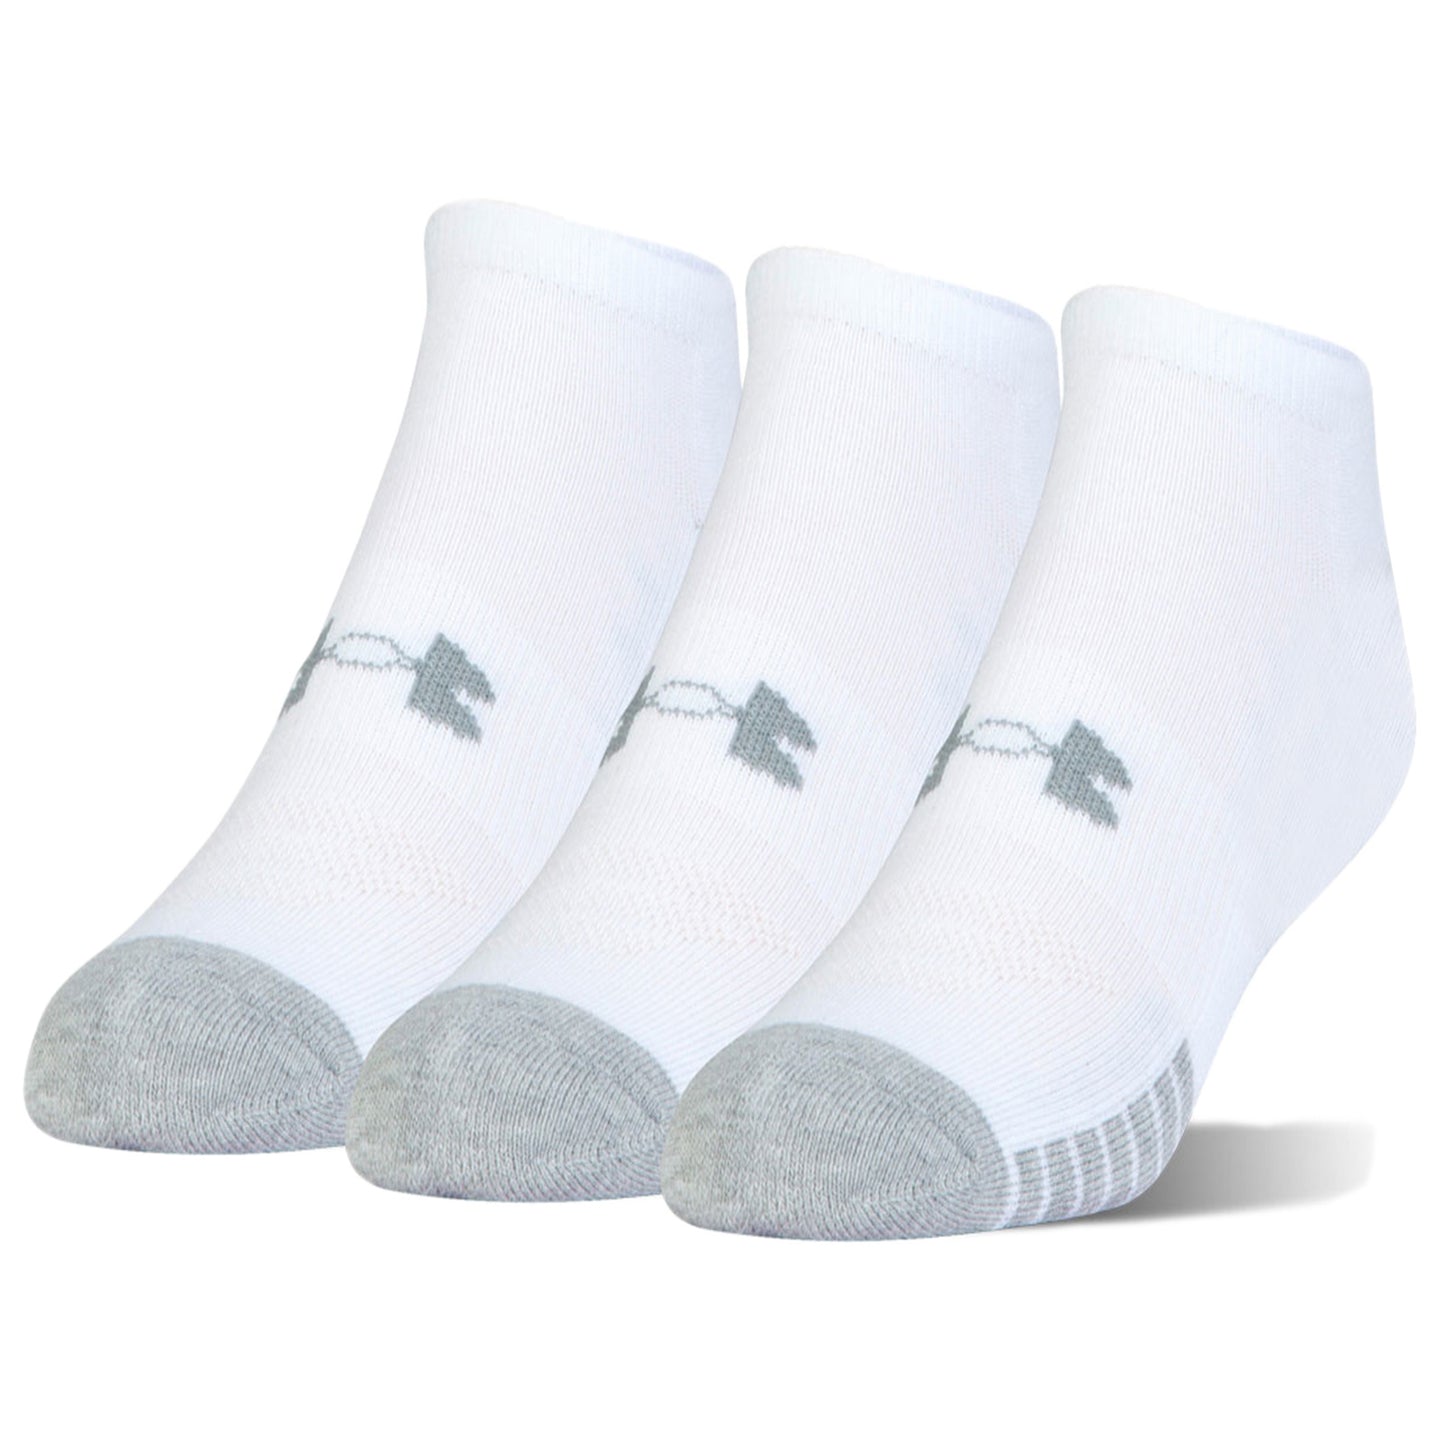 Under Armour Mens No Show Sports Socks (3 Pairs)